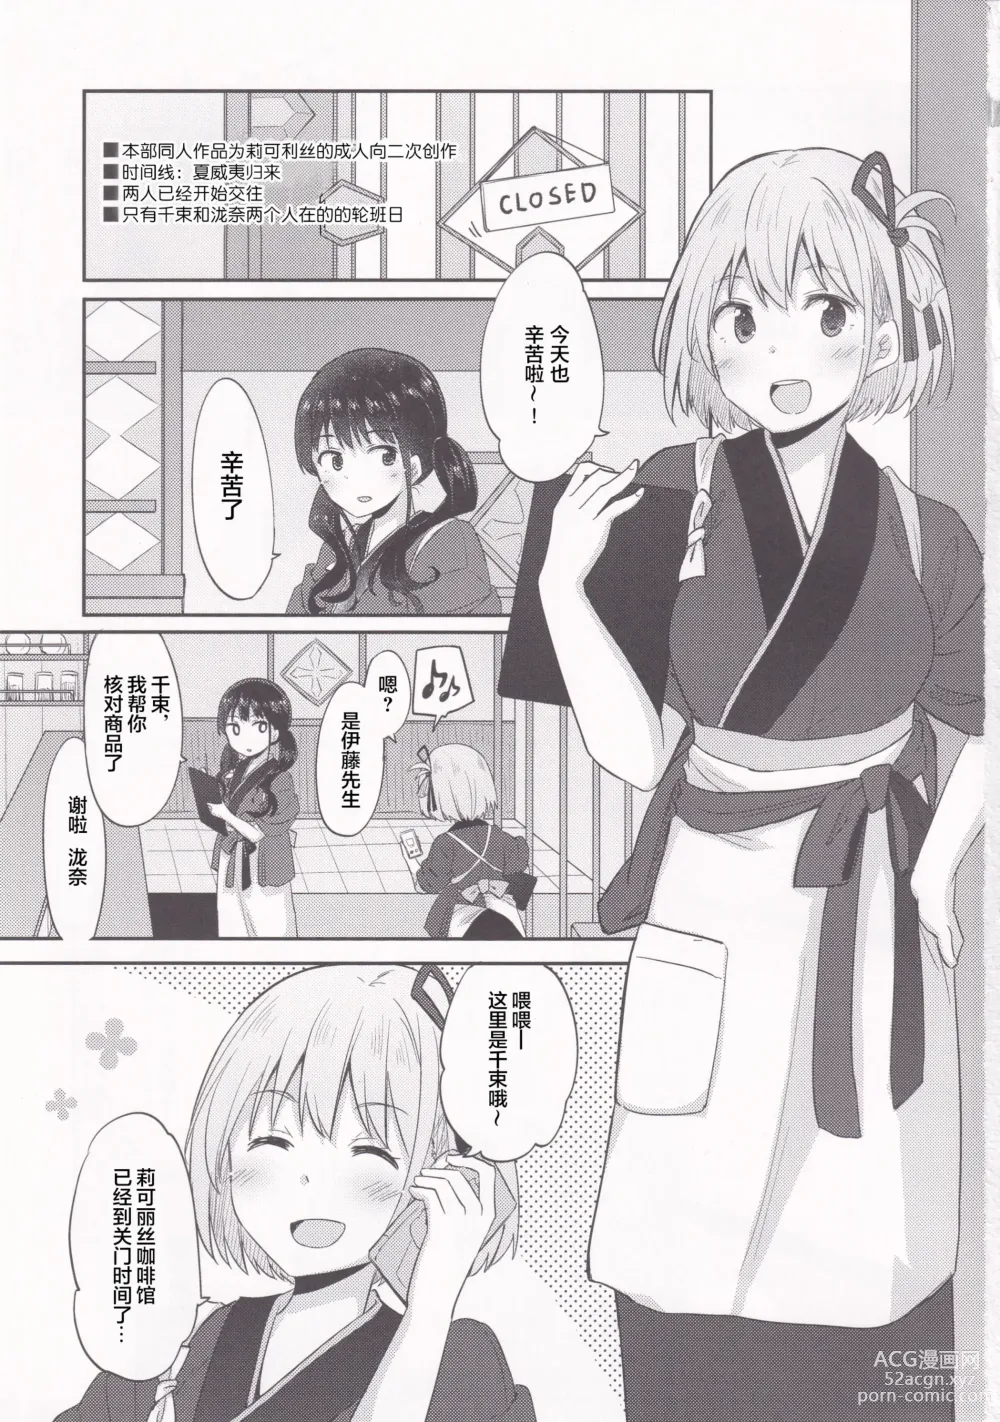 Page 2 of doujinshi 莉可利丝限定直播